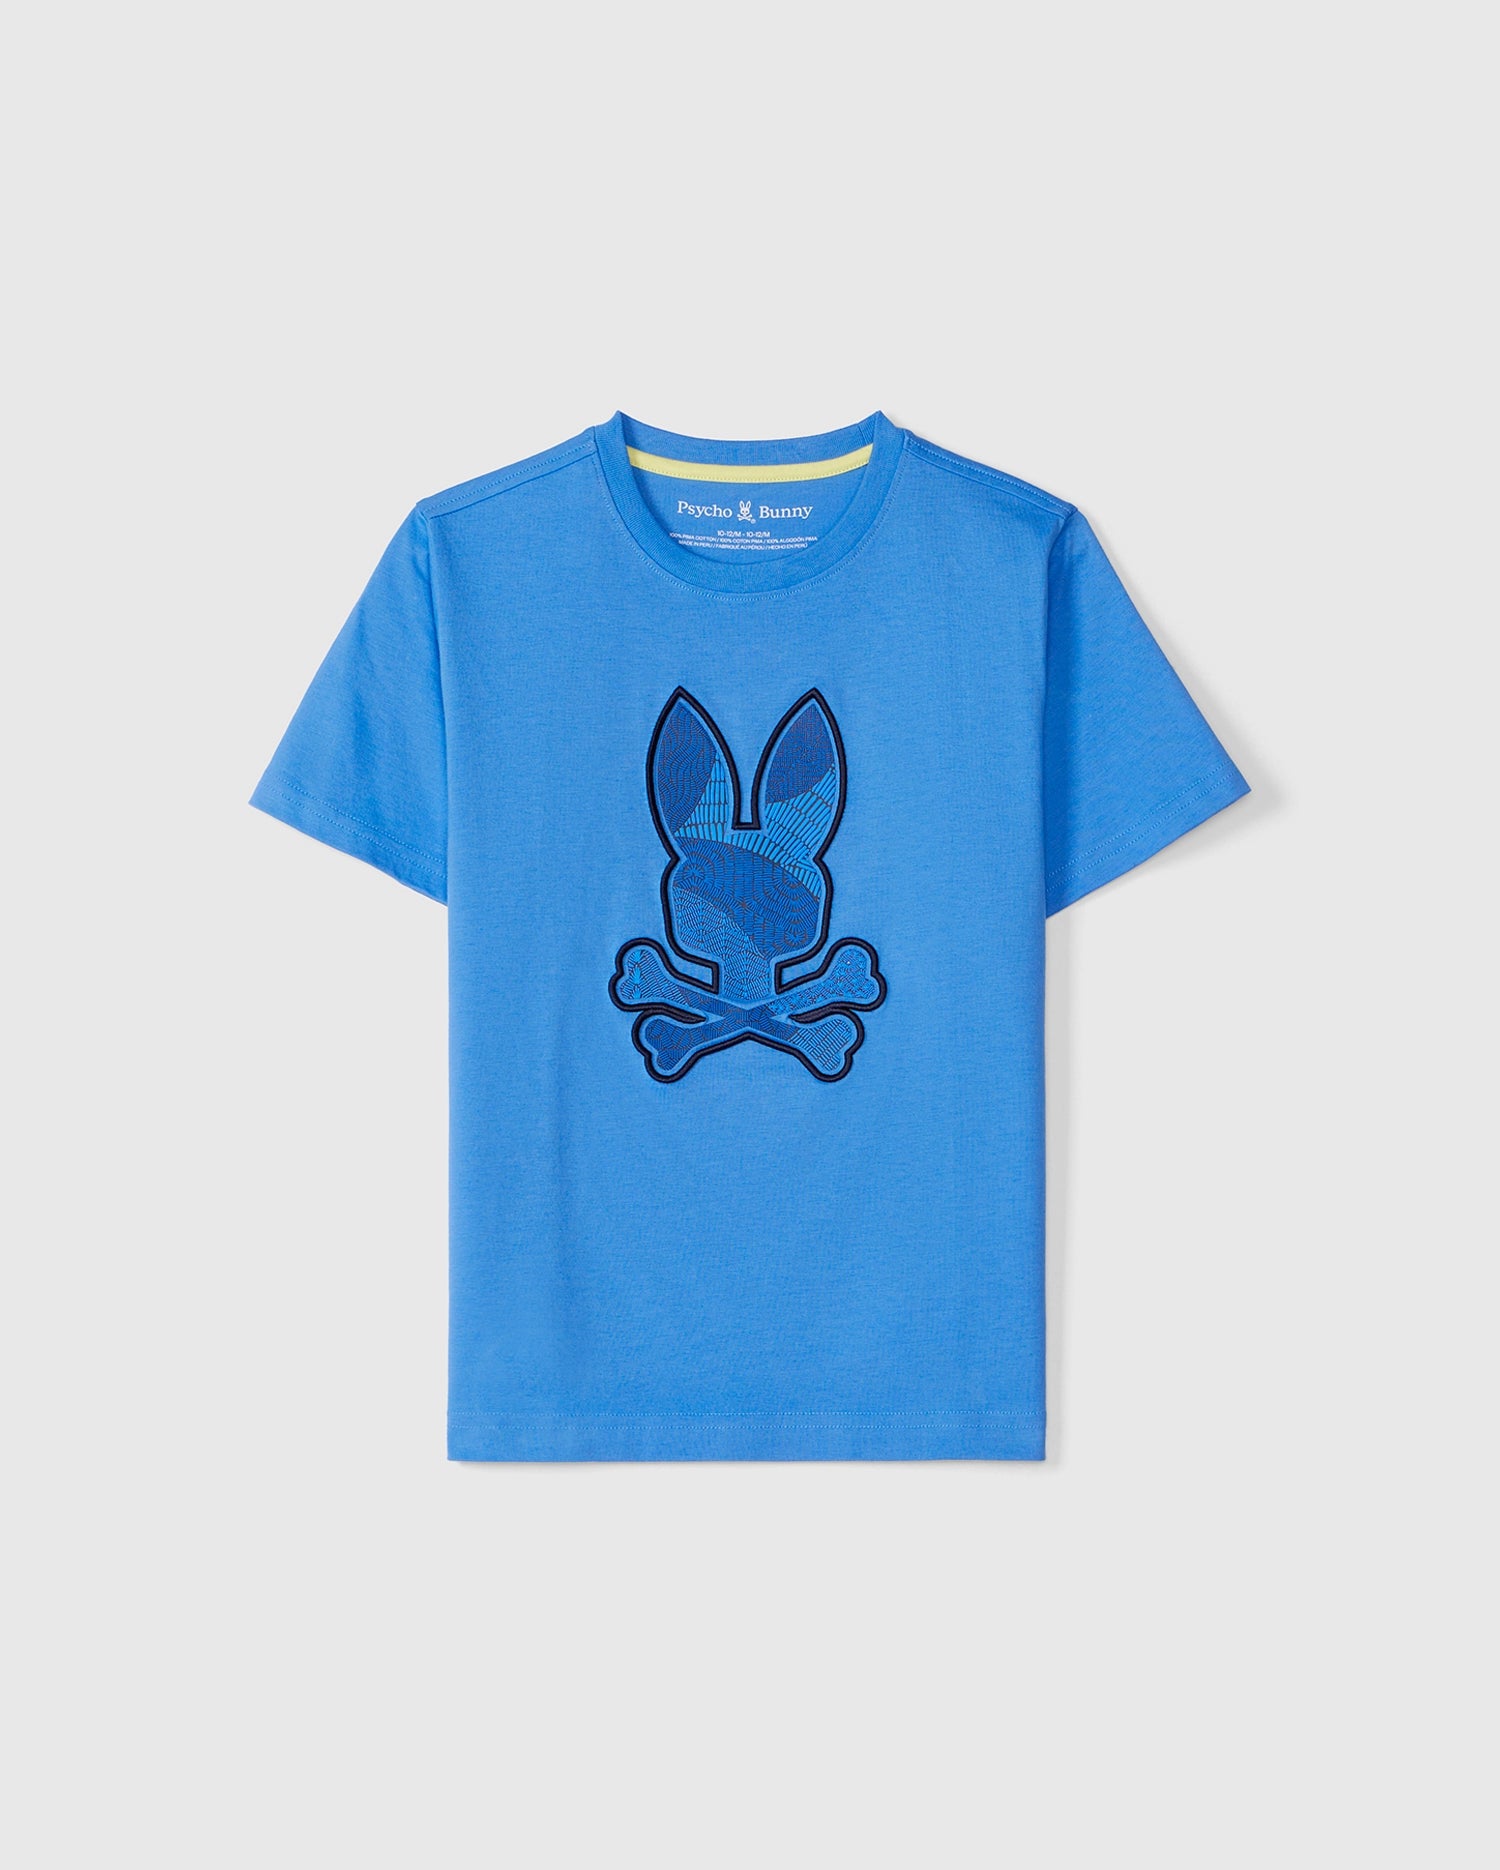 A blue short-sleeve kids' **KIDS LENOX EMBROIDERED GRAPHIC TEE - B0U405B200** made from soft Pima cotton, featuring a black embroidered graphic of a bunny head with crossed bones beneath it on the front. The shirt also has a round neckline. Brand: **Psycho Bunny**.